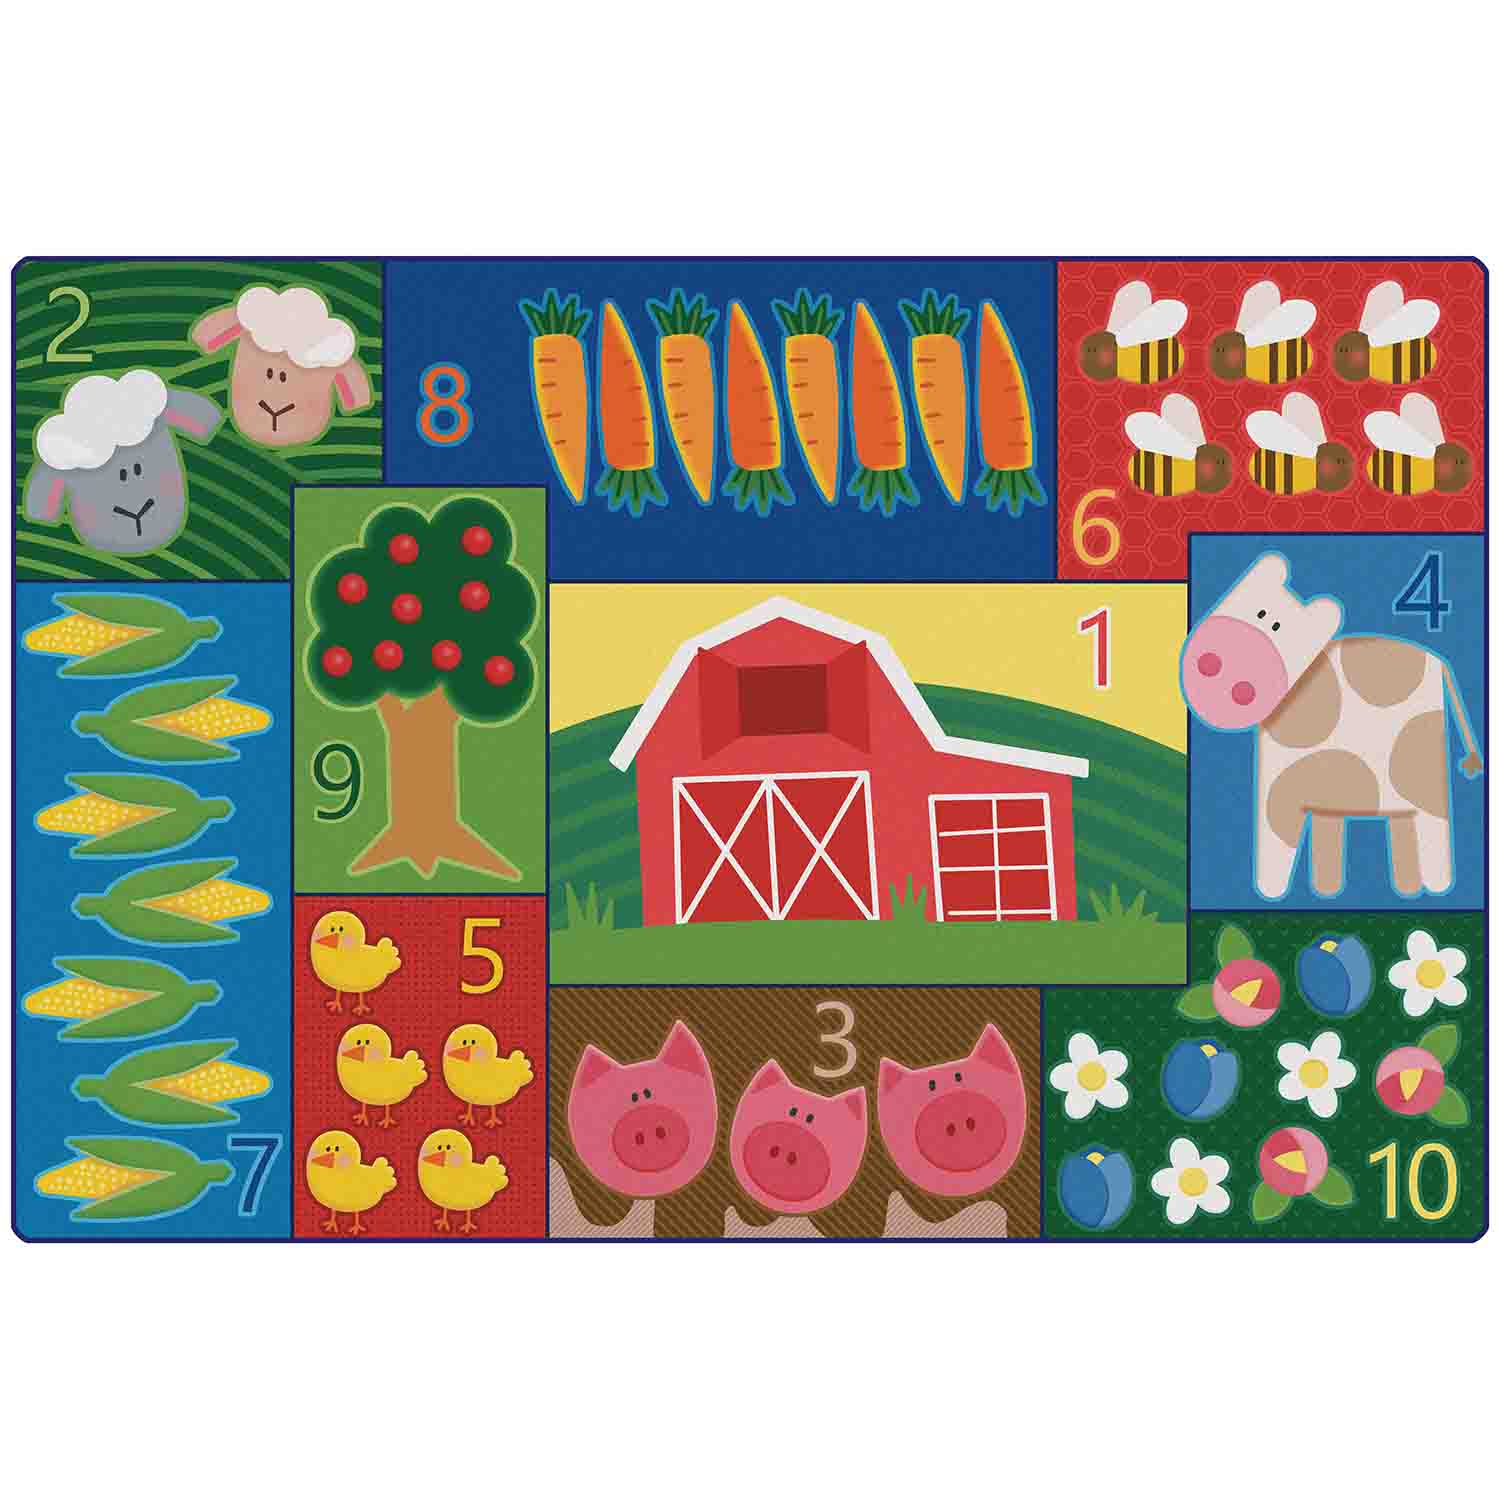 Pixel Perfect™ Farm Counting Rug Rectangle 4' x 6'